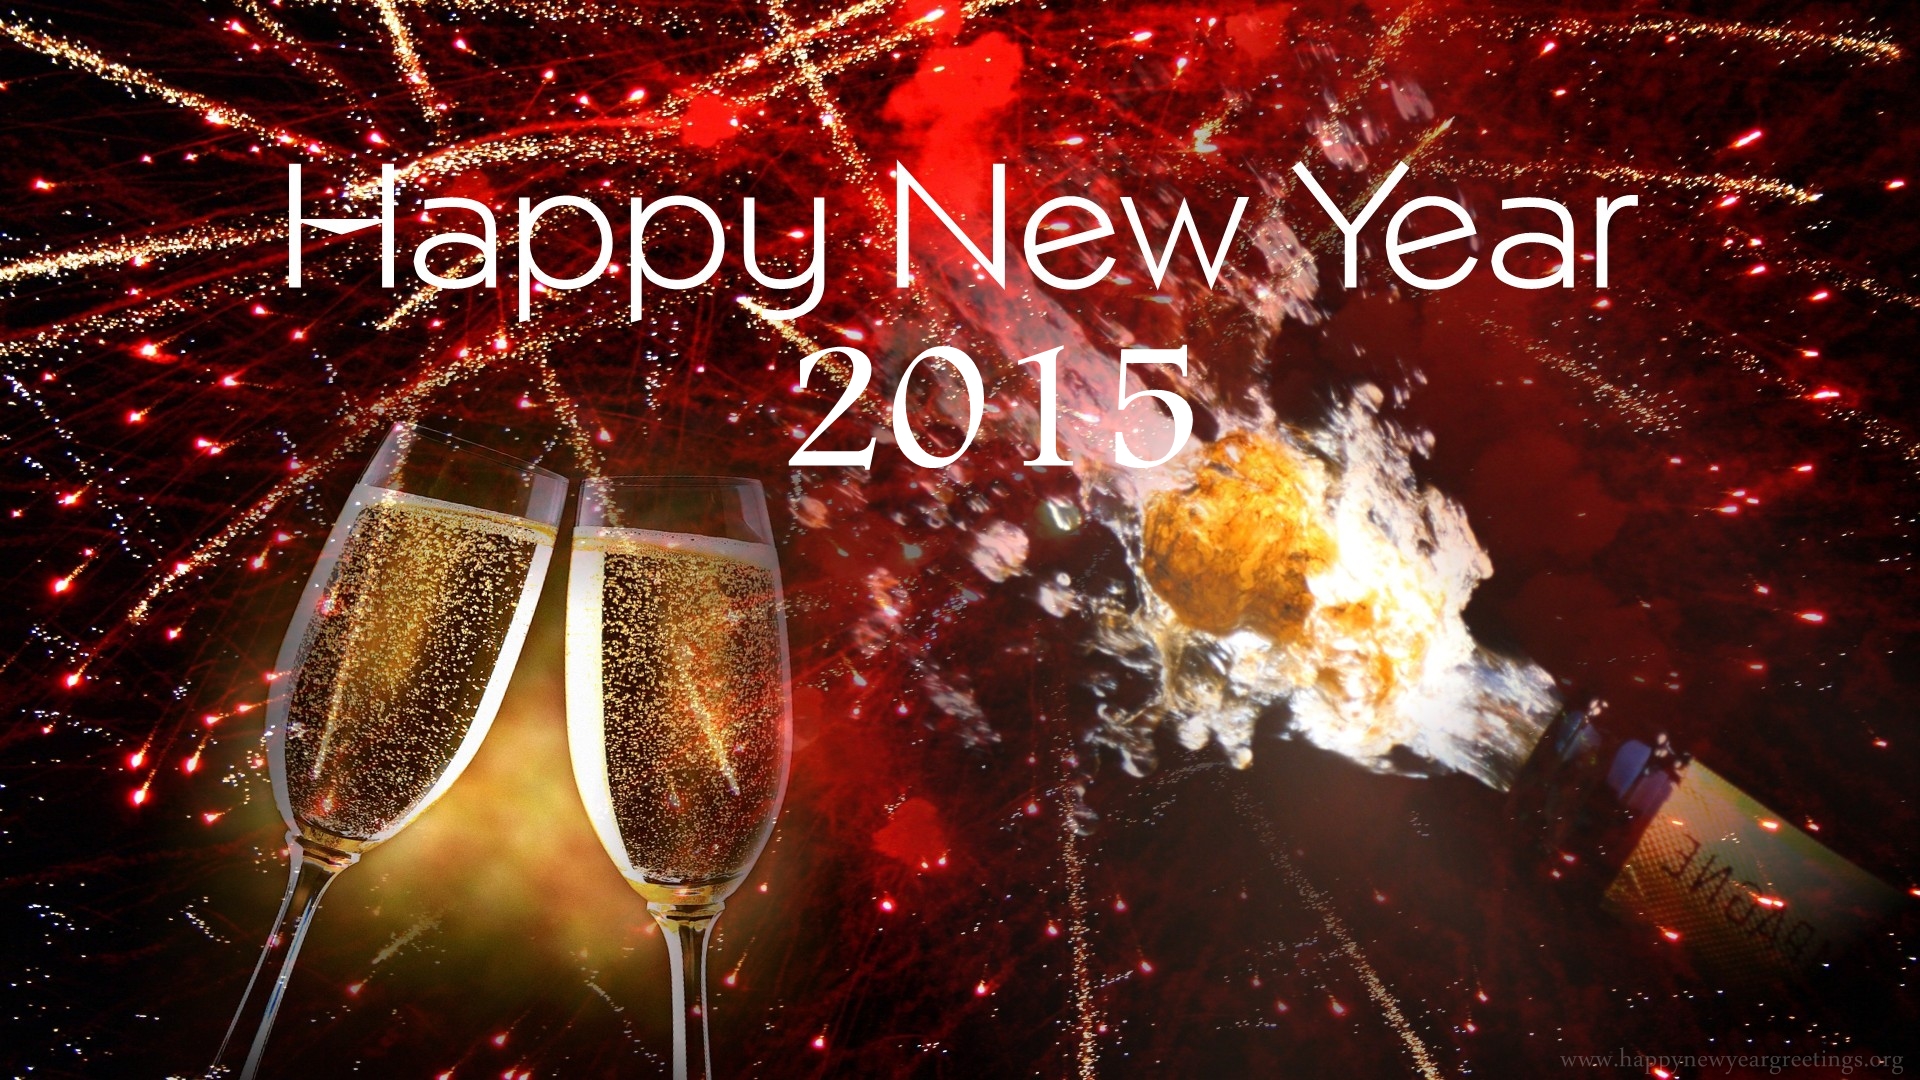 Nice wallpapers New Year 2015 1920x1080px